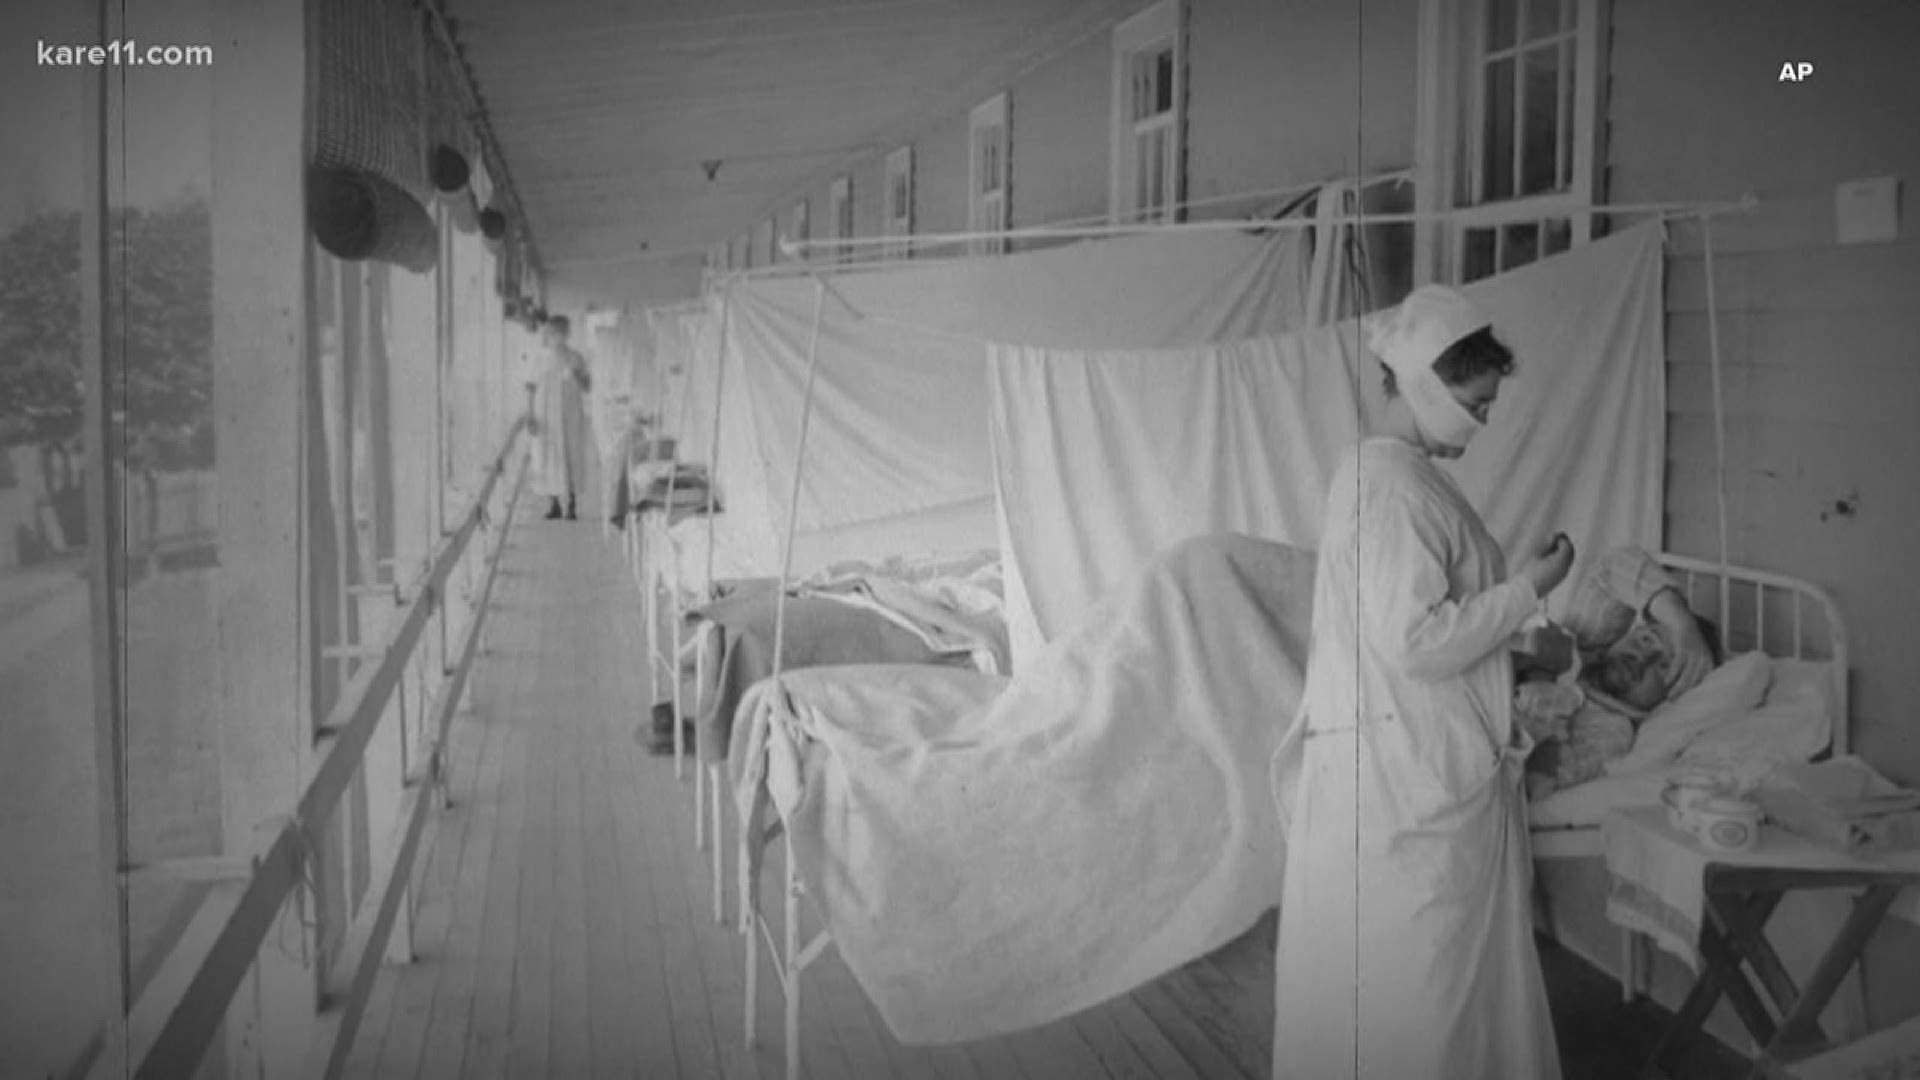 Study shows how 43 U.S. cities recovered economically after the 1918 flu pandemic. What they discovered might surprise you.